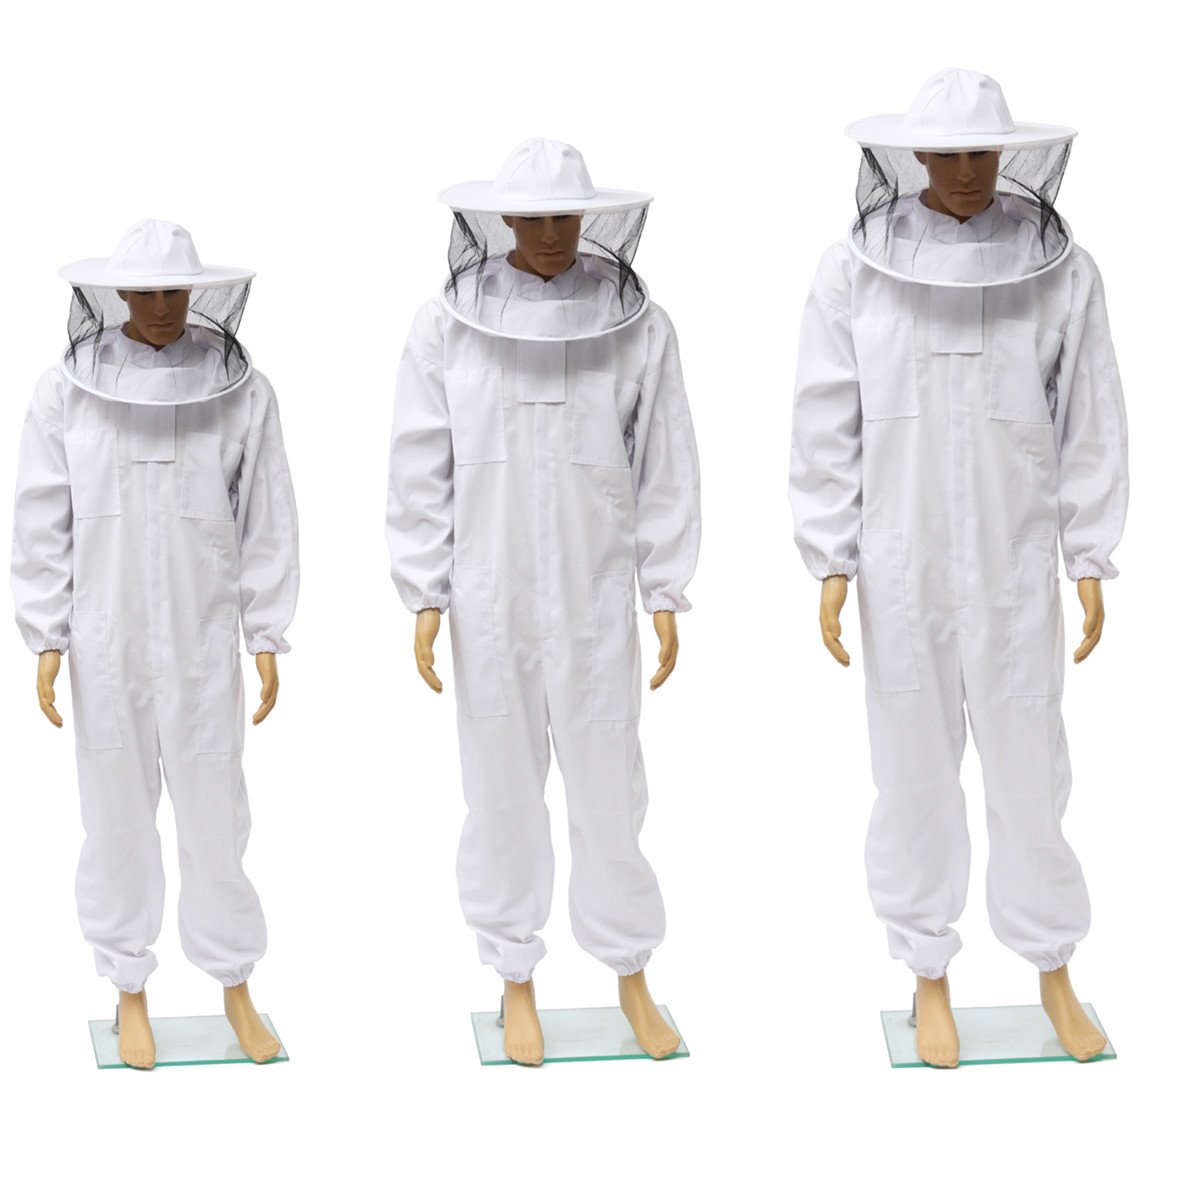 Beekeepers Bee Keeping Cotton Full Protector Suit With Veil Hat Hood Bee Suit XL XXL XXL 2